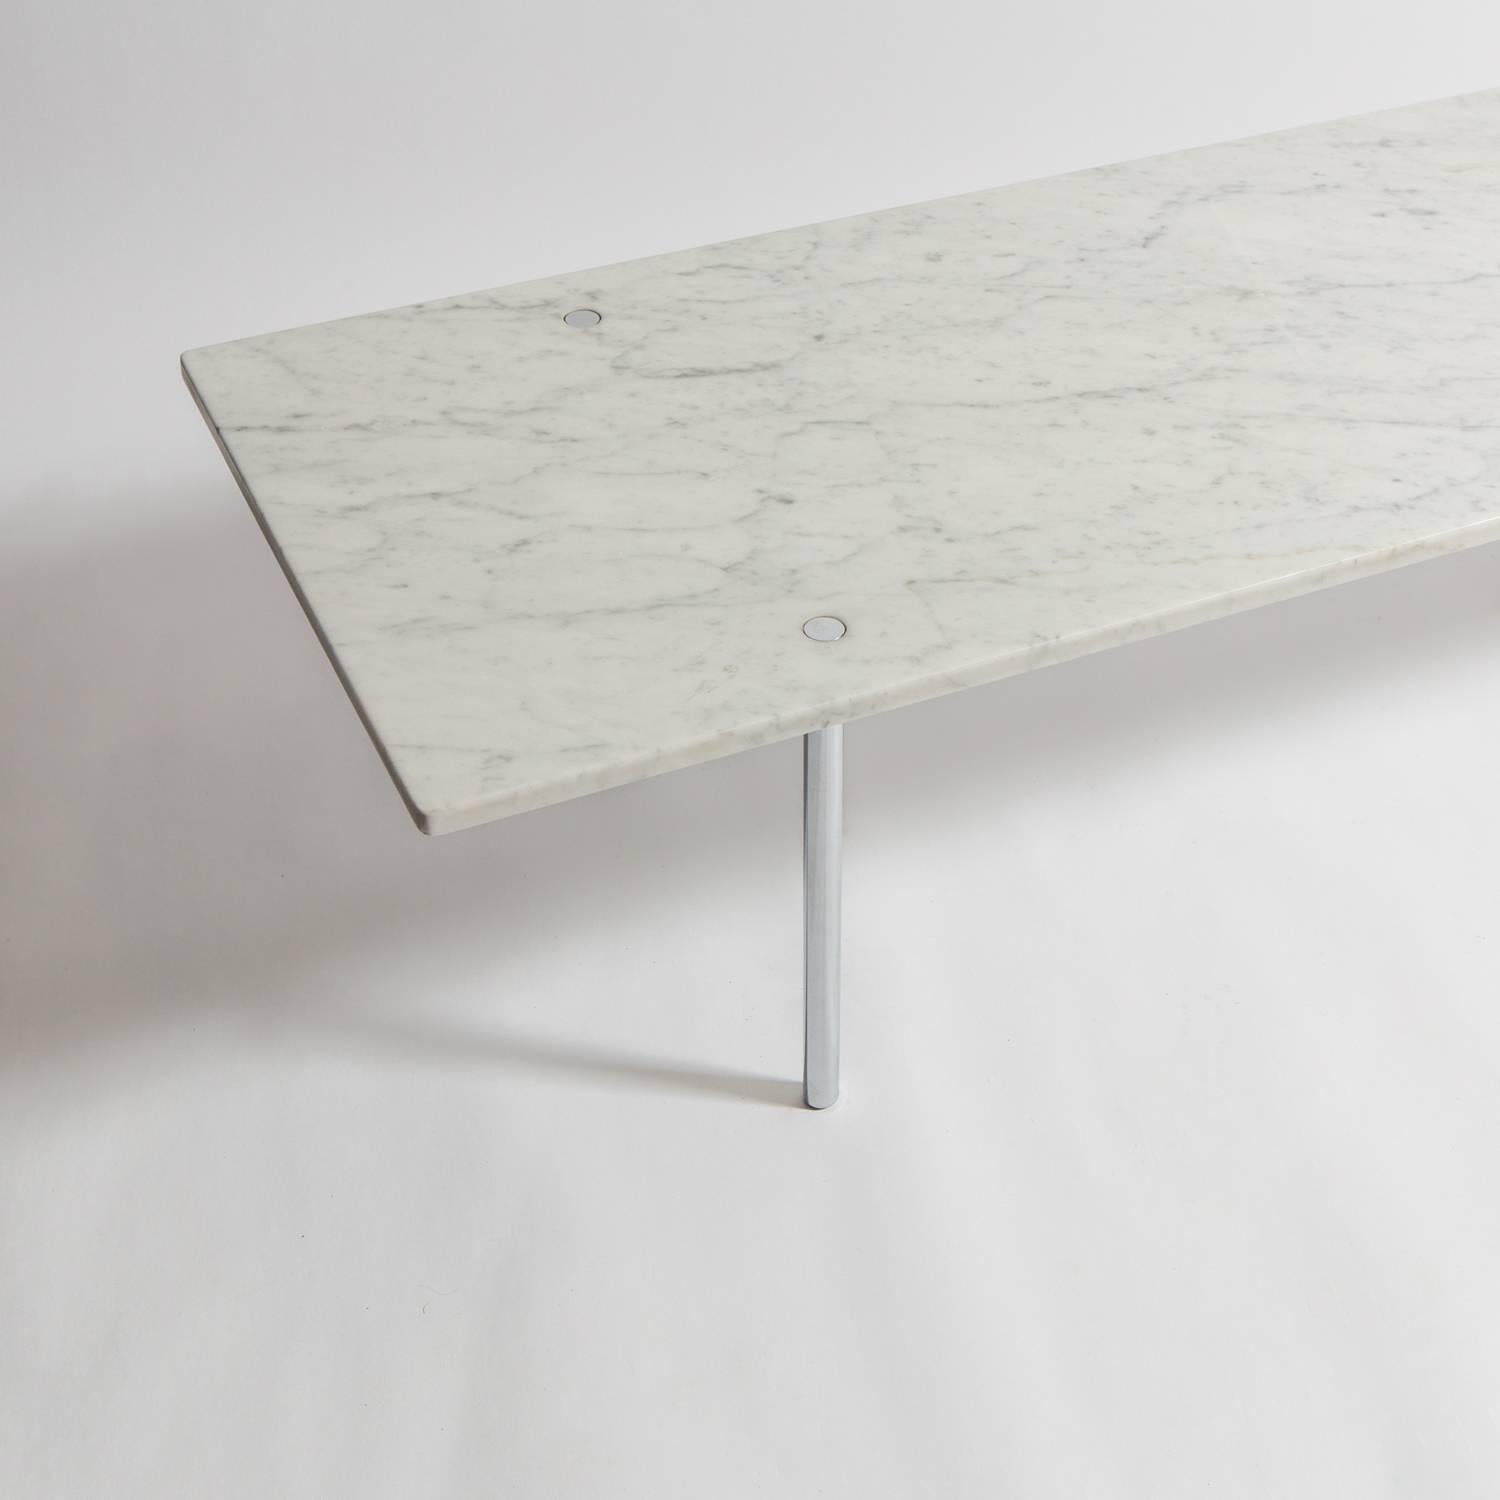 Carrara marble and chrome-plated steel coffee table by husband and wife design team Estelle and Erwine Laverne for Laverne Originals.